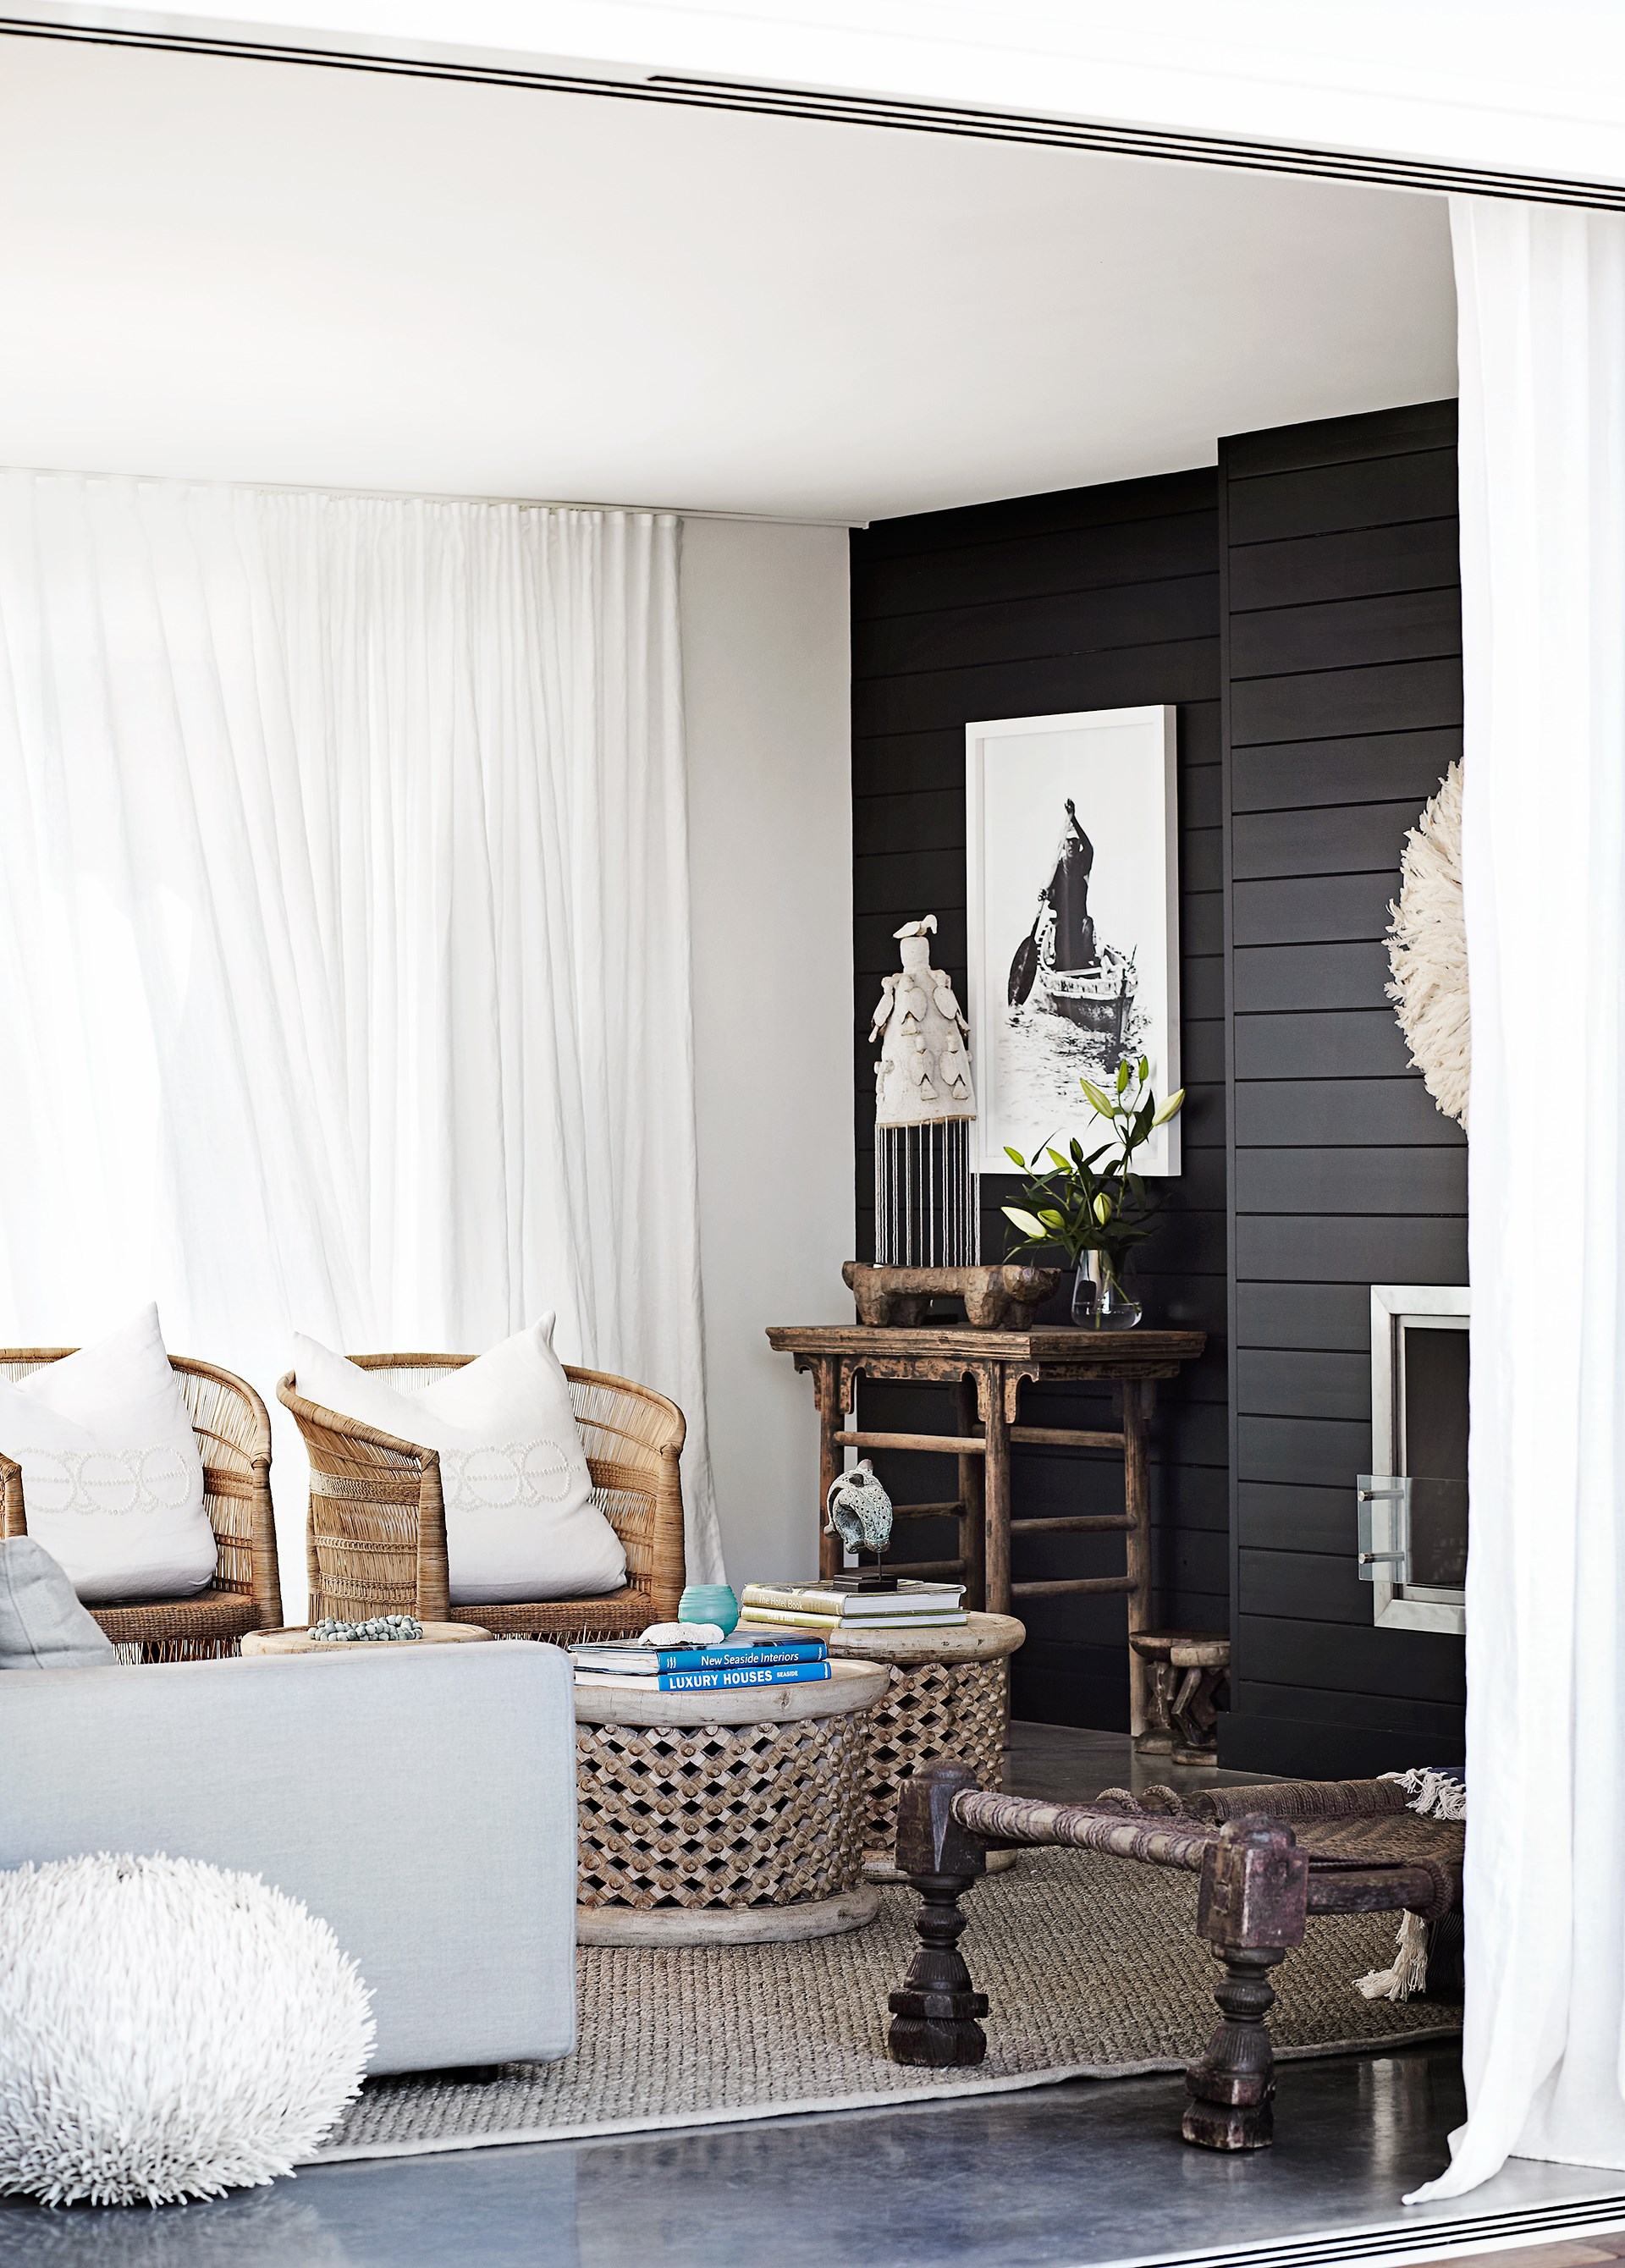 Tribal and organic objects mix with rustic furniture and a coastal aesthetic in this global-inspired [weatherboard home](https://www.homestolove.com.au/weatherboard-home-with-wow-factor-3458|target="_blank") - the epitome of beachy boho style. *Photo:* Sharyn Cairns